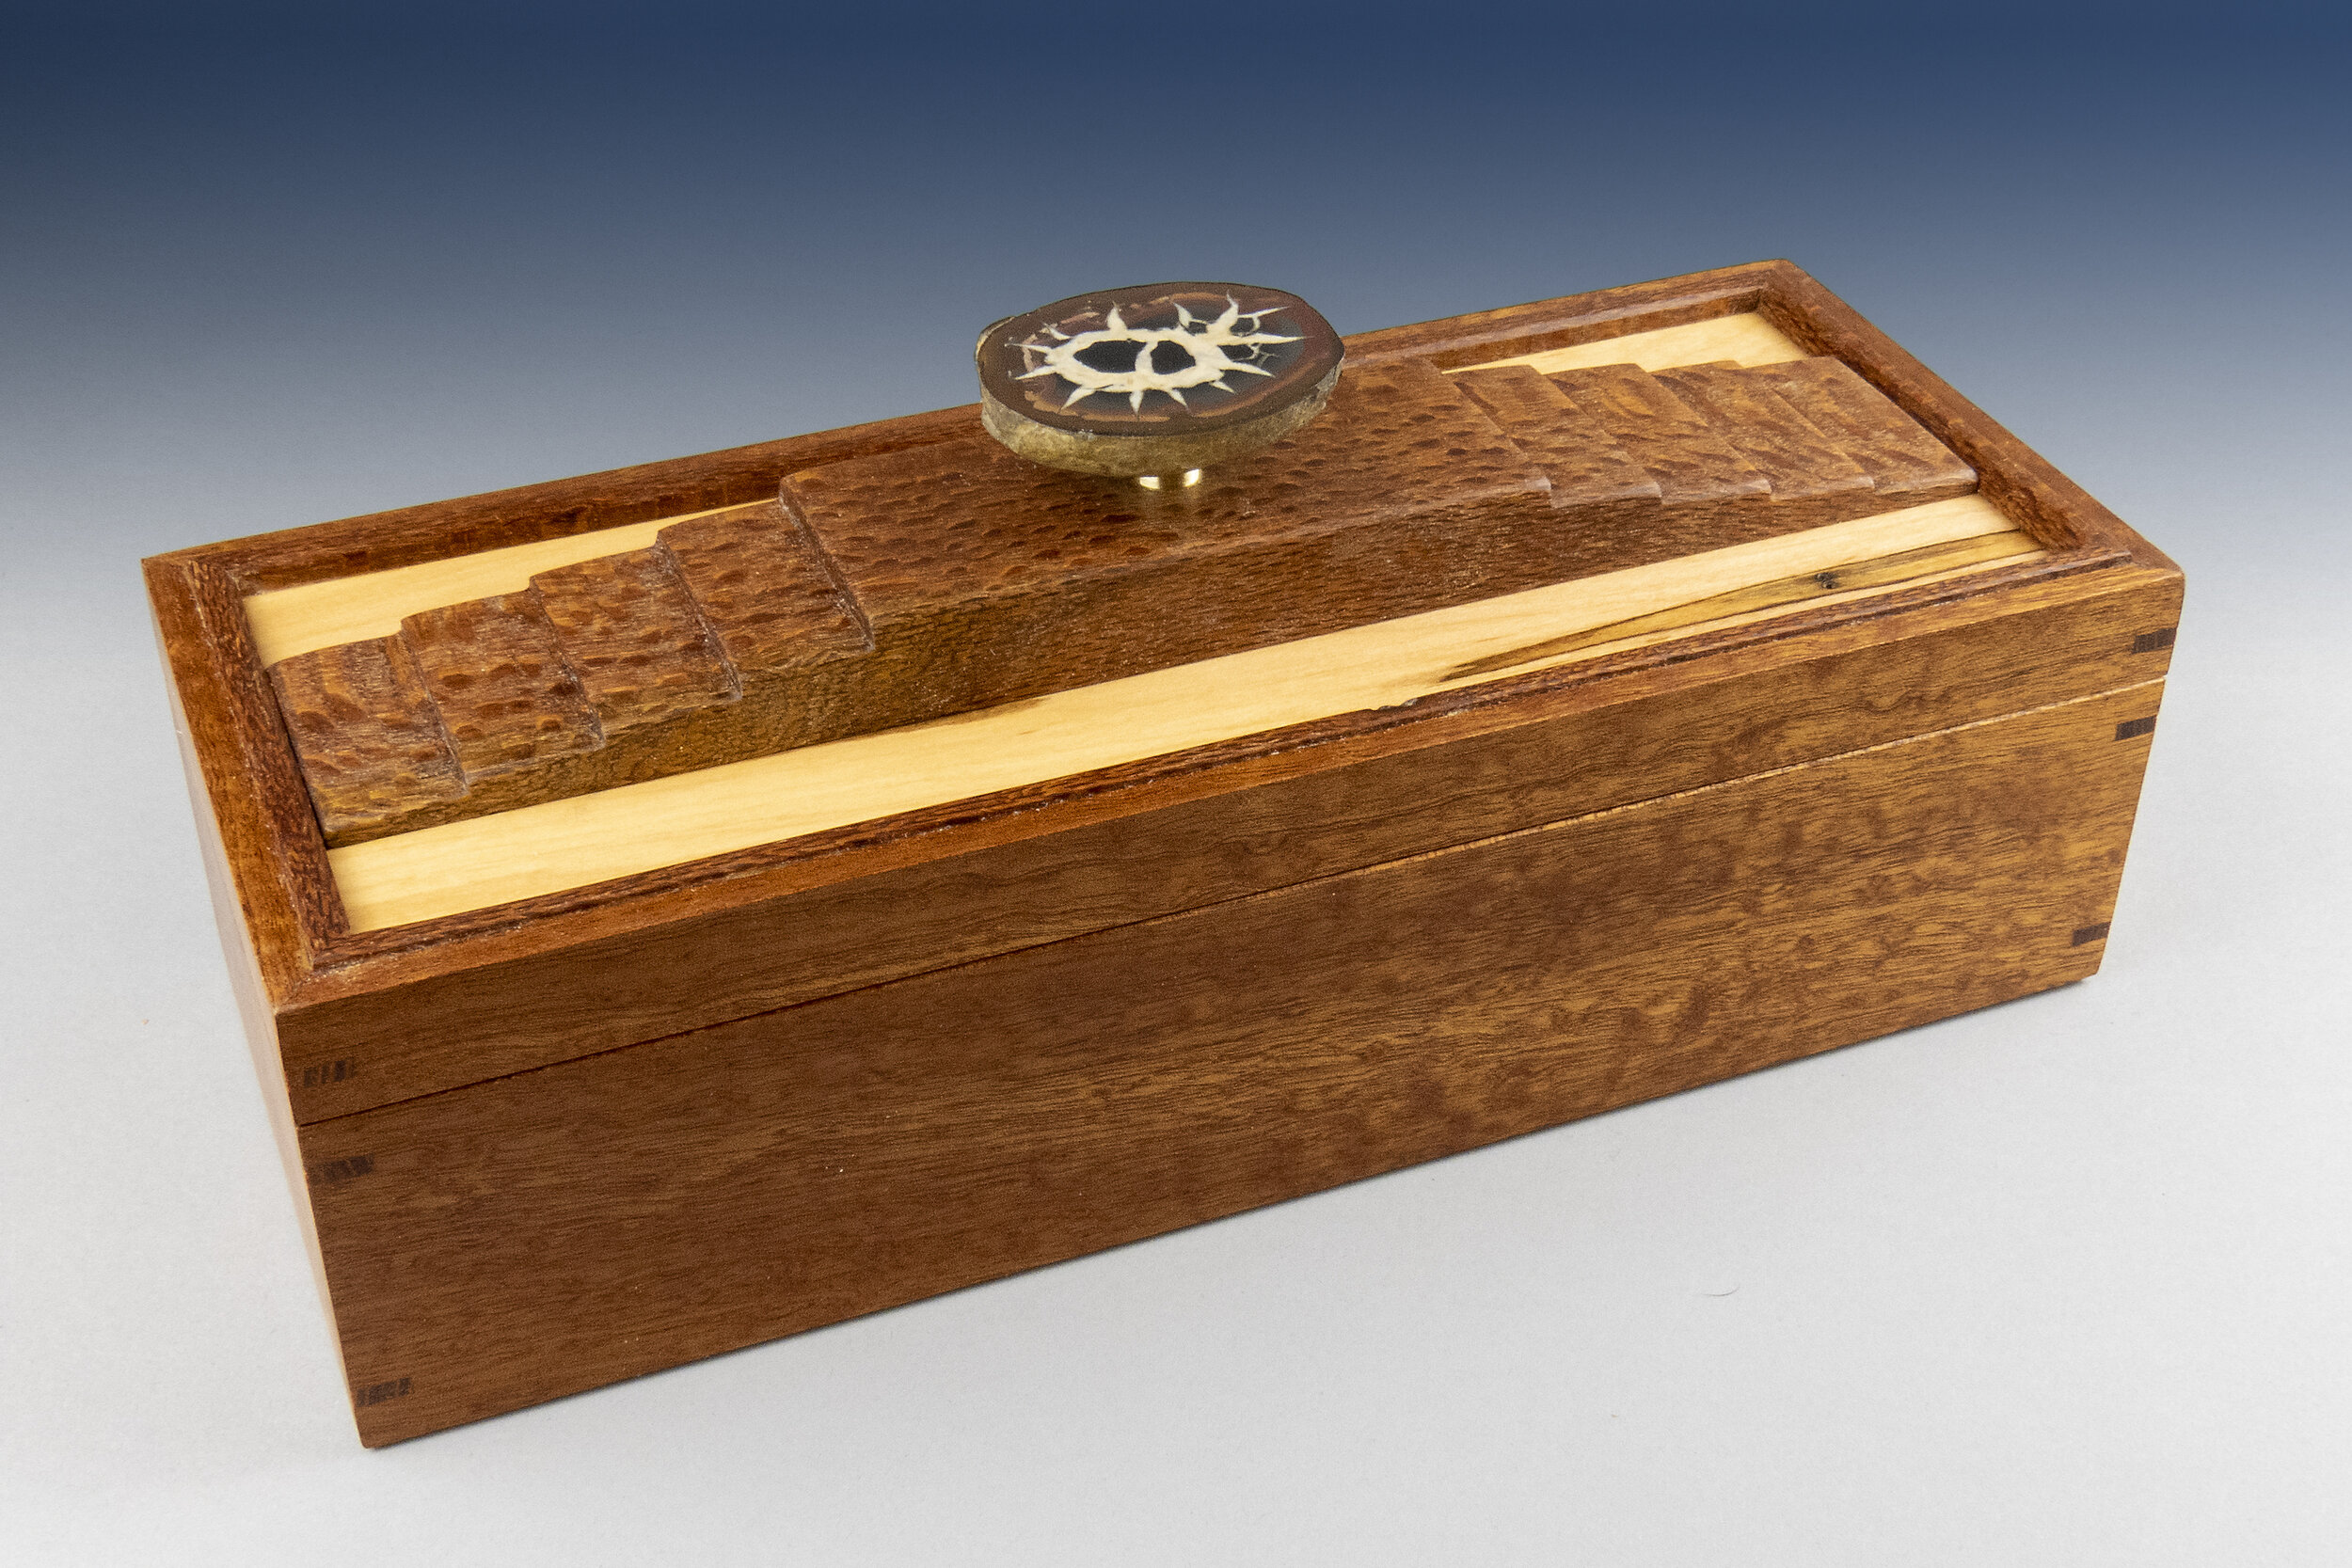 Moroccan Watch Box: SOLD